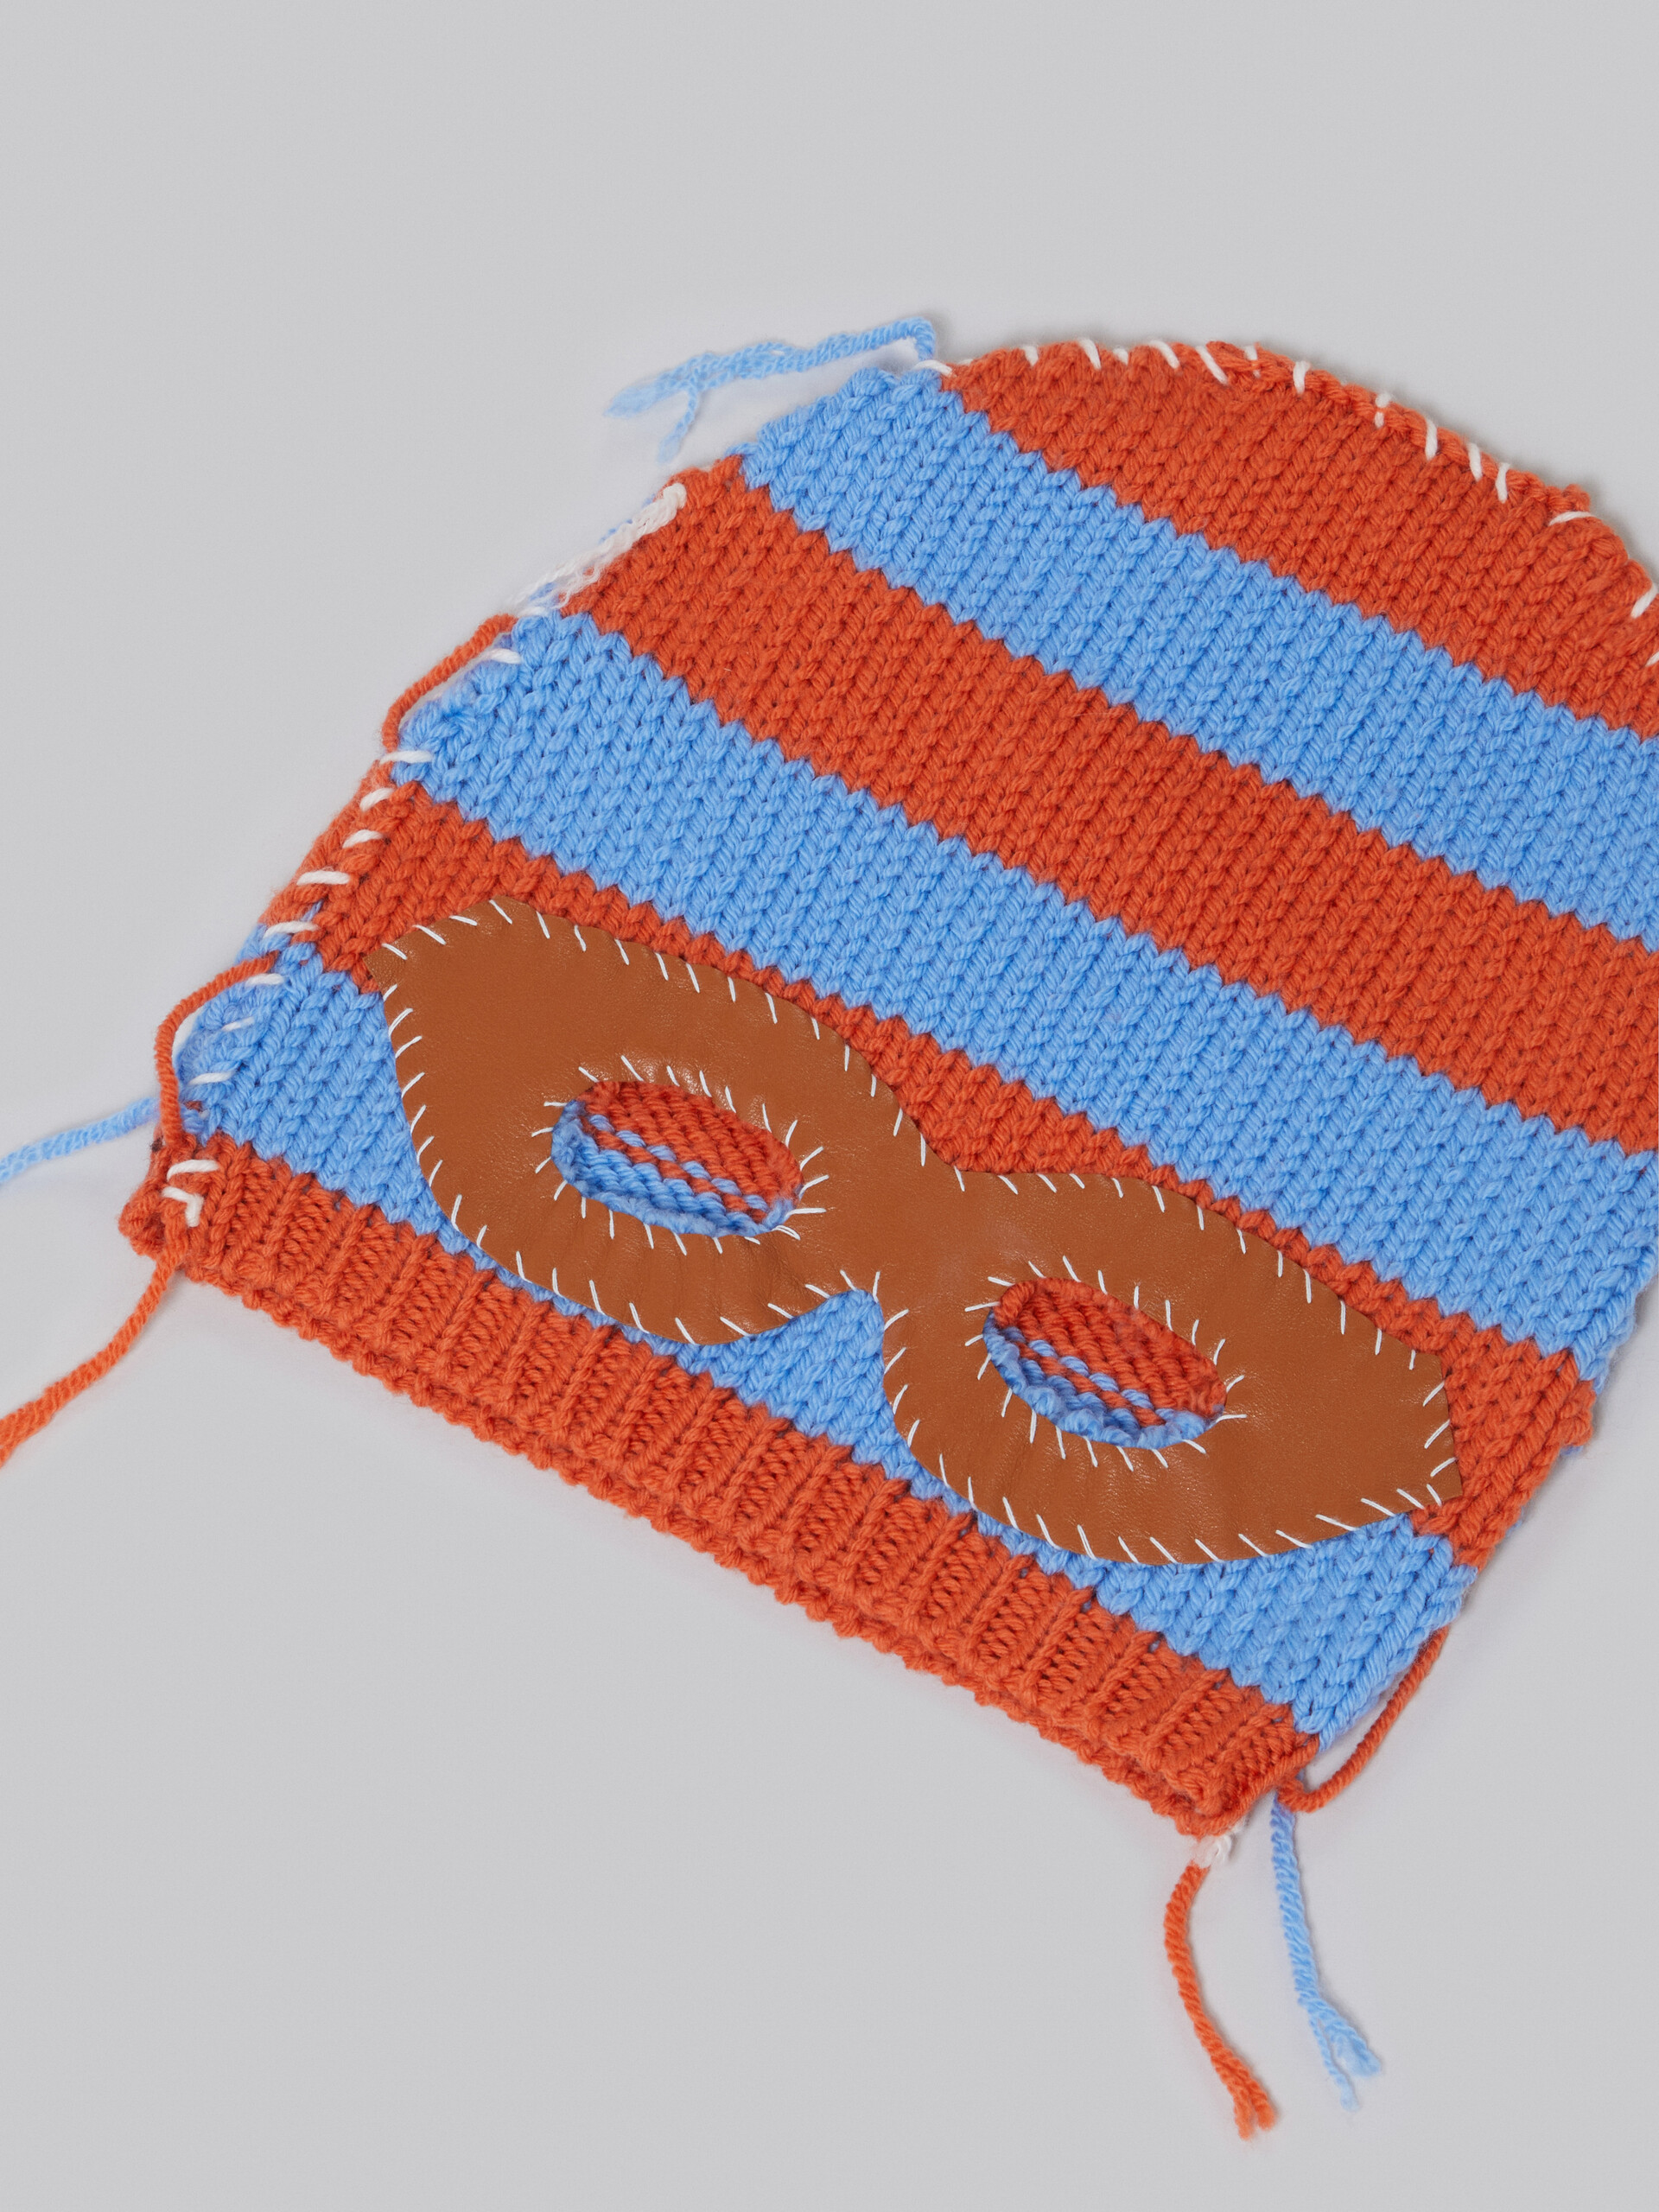 Knitted wool balaclava with blue and orange stripes - Other accessories - Image 3